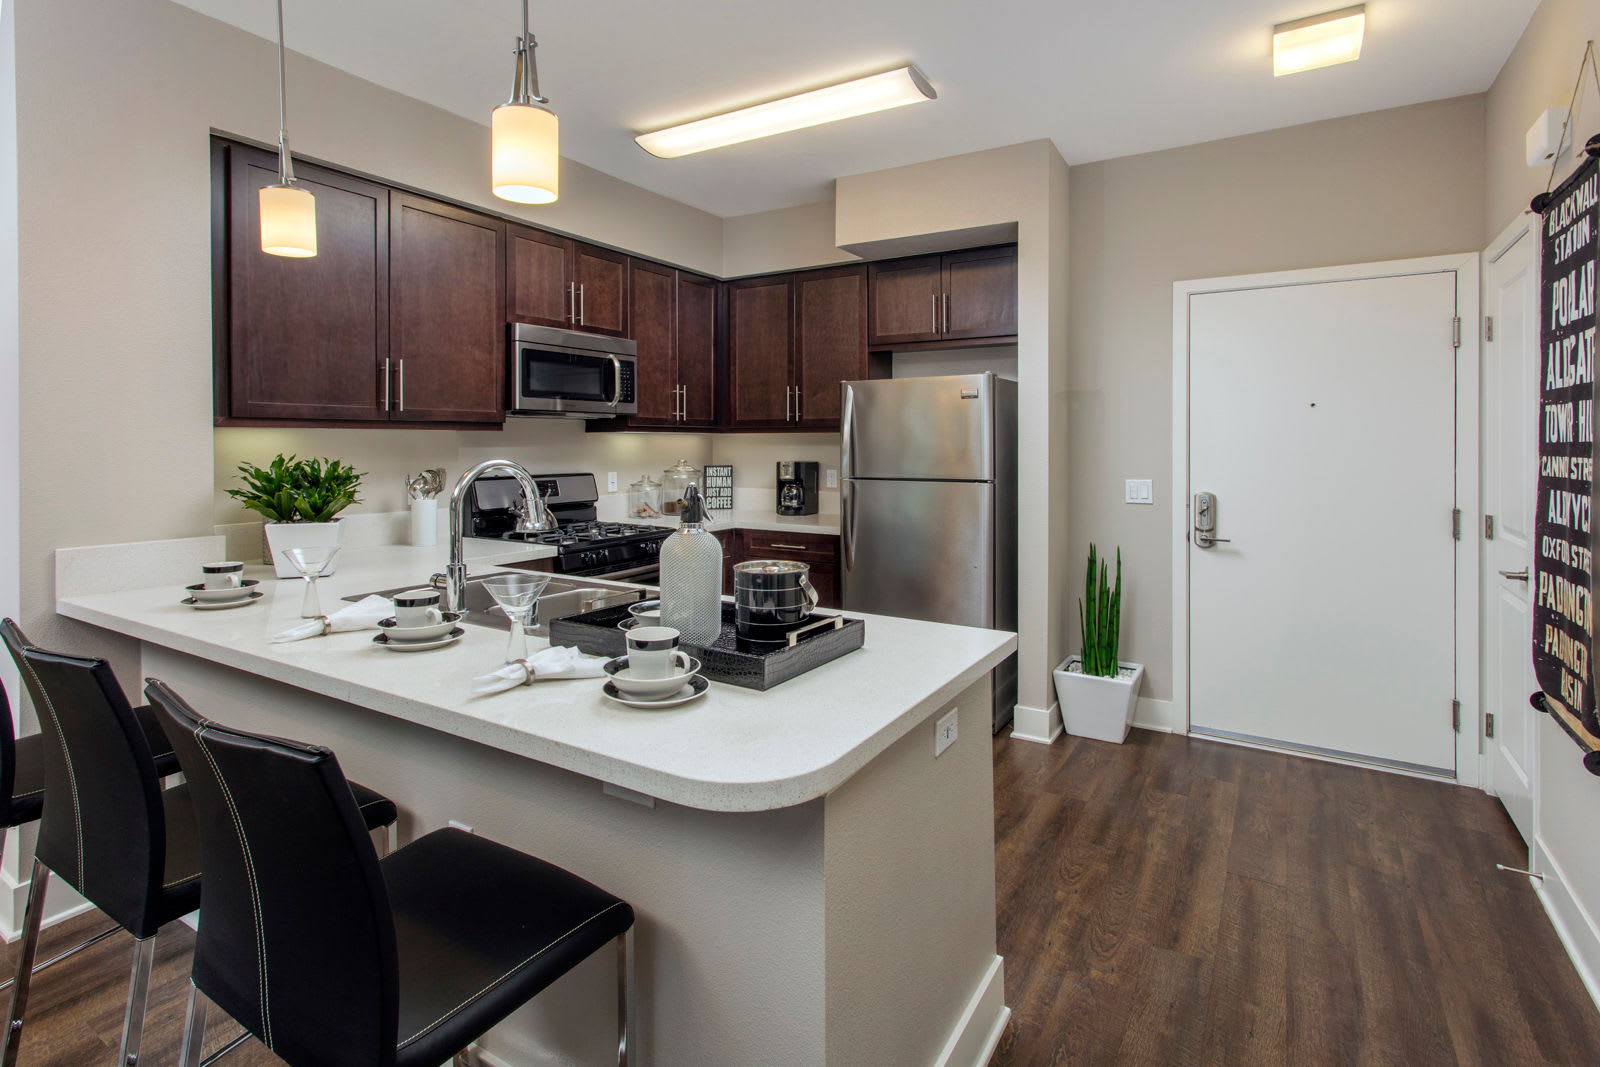 Model kitchen with bar at The Boulevard Apartment Homes in Woodland Hills, California